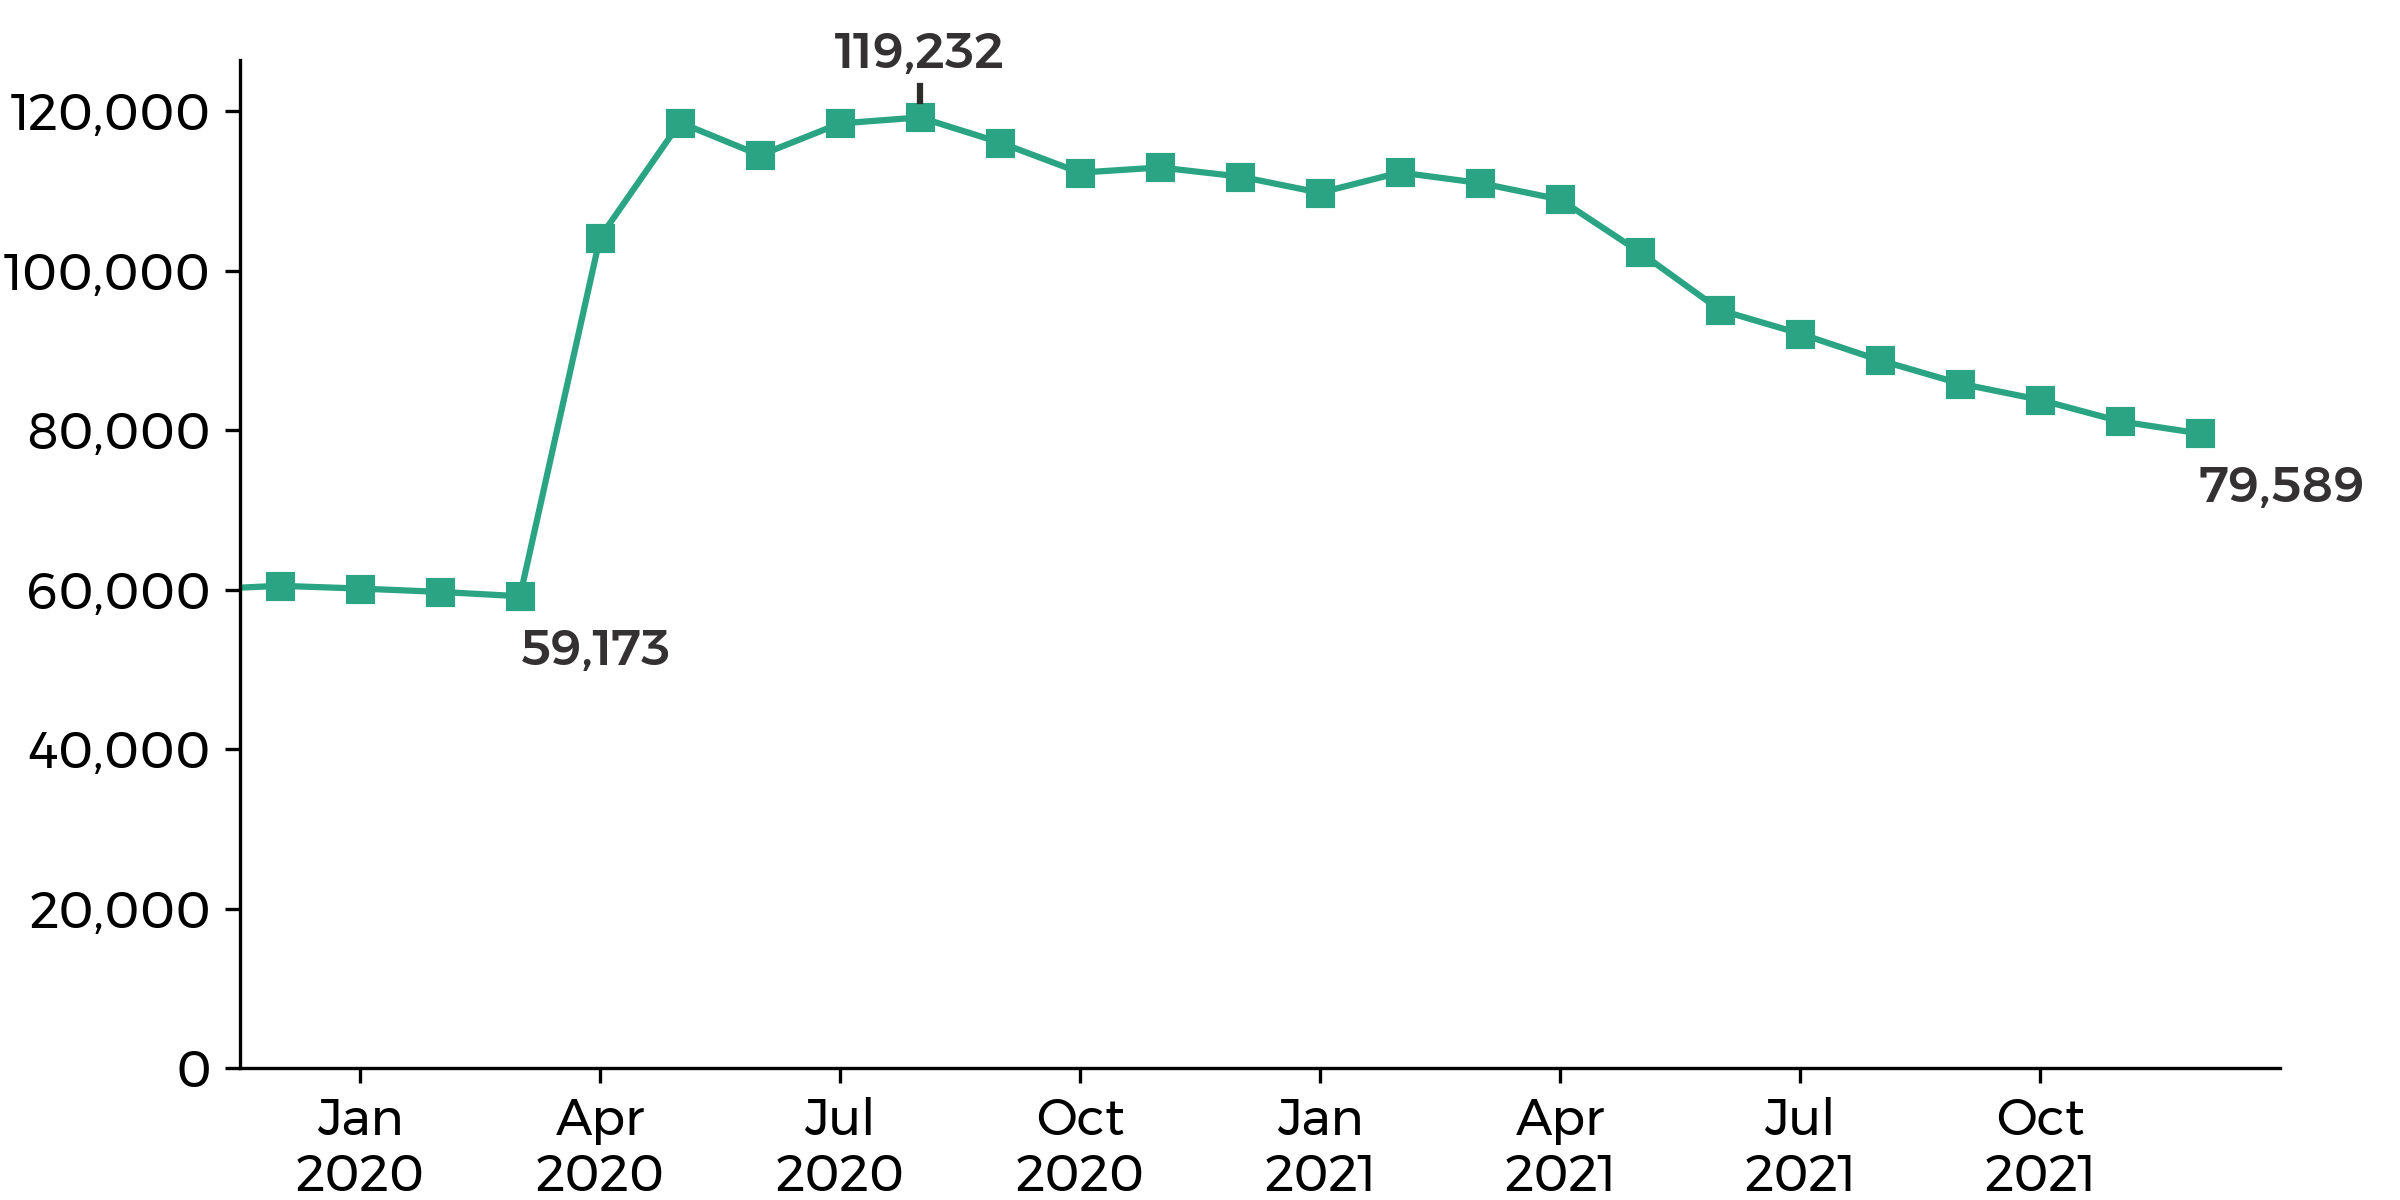 graph showing the Wales claimant count went up from 59,173 in March 2020 to 119,232 in August 2020, then decreasing to 79,589 in December 2021.